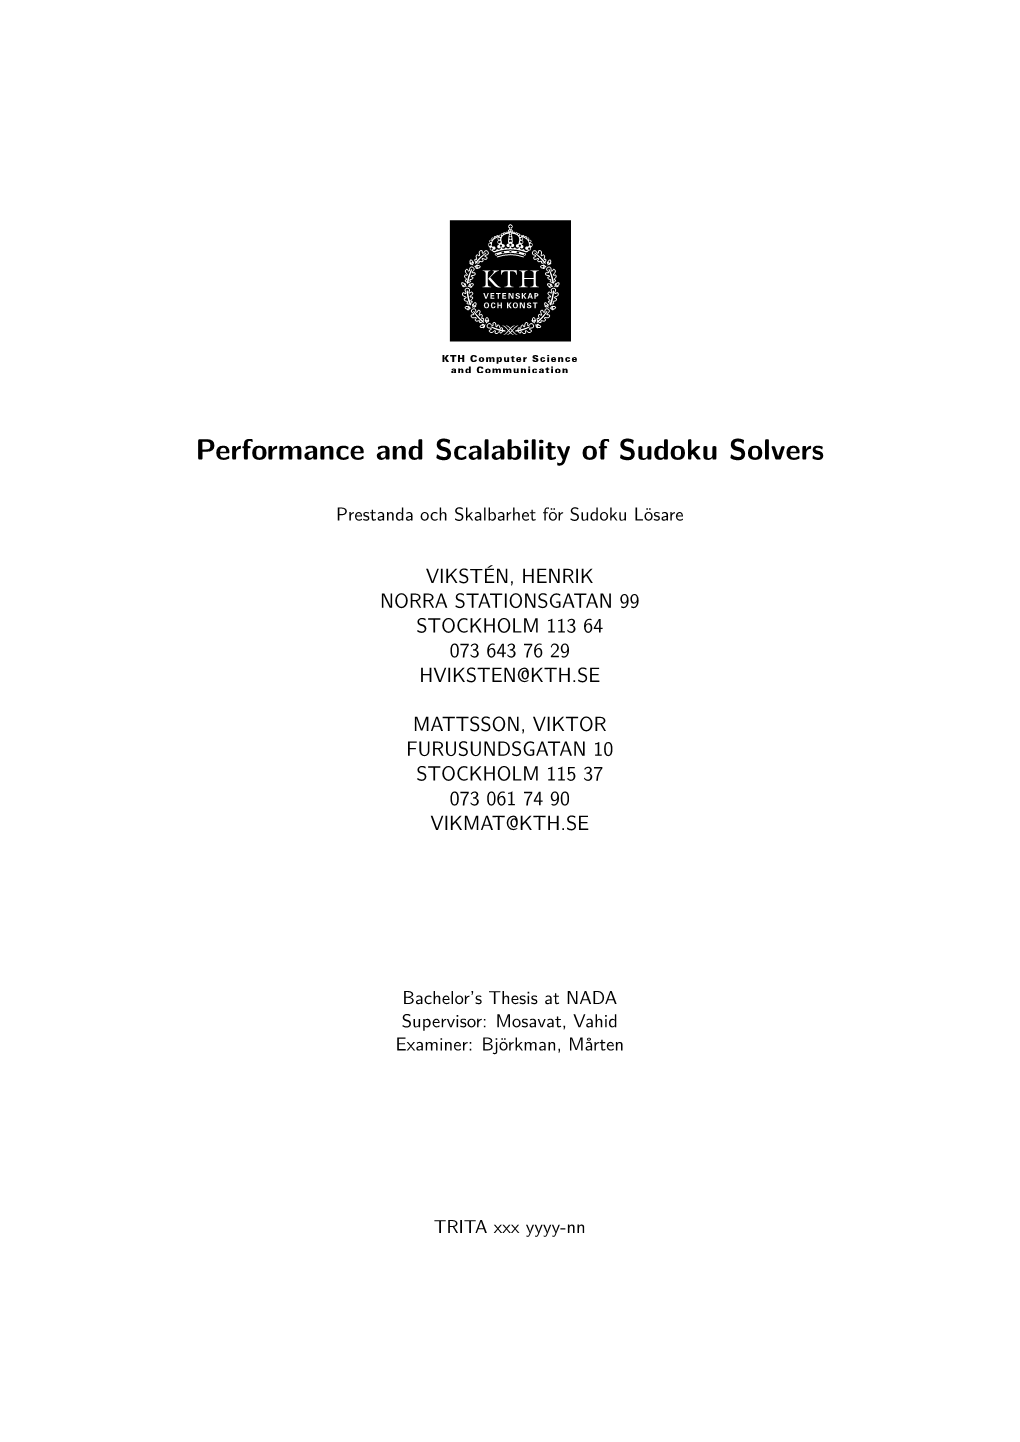 Performance and Scalability of Sudoku Solvers